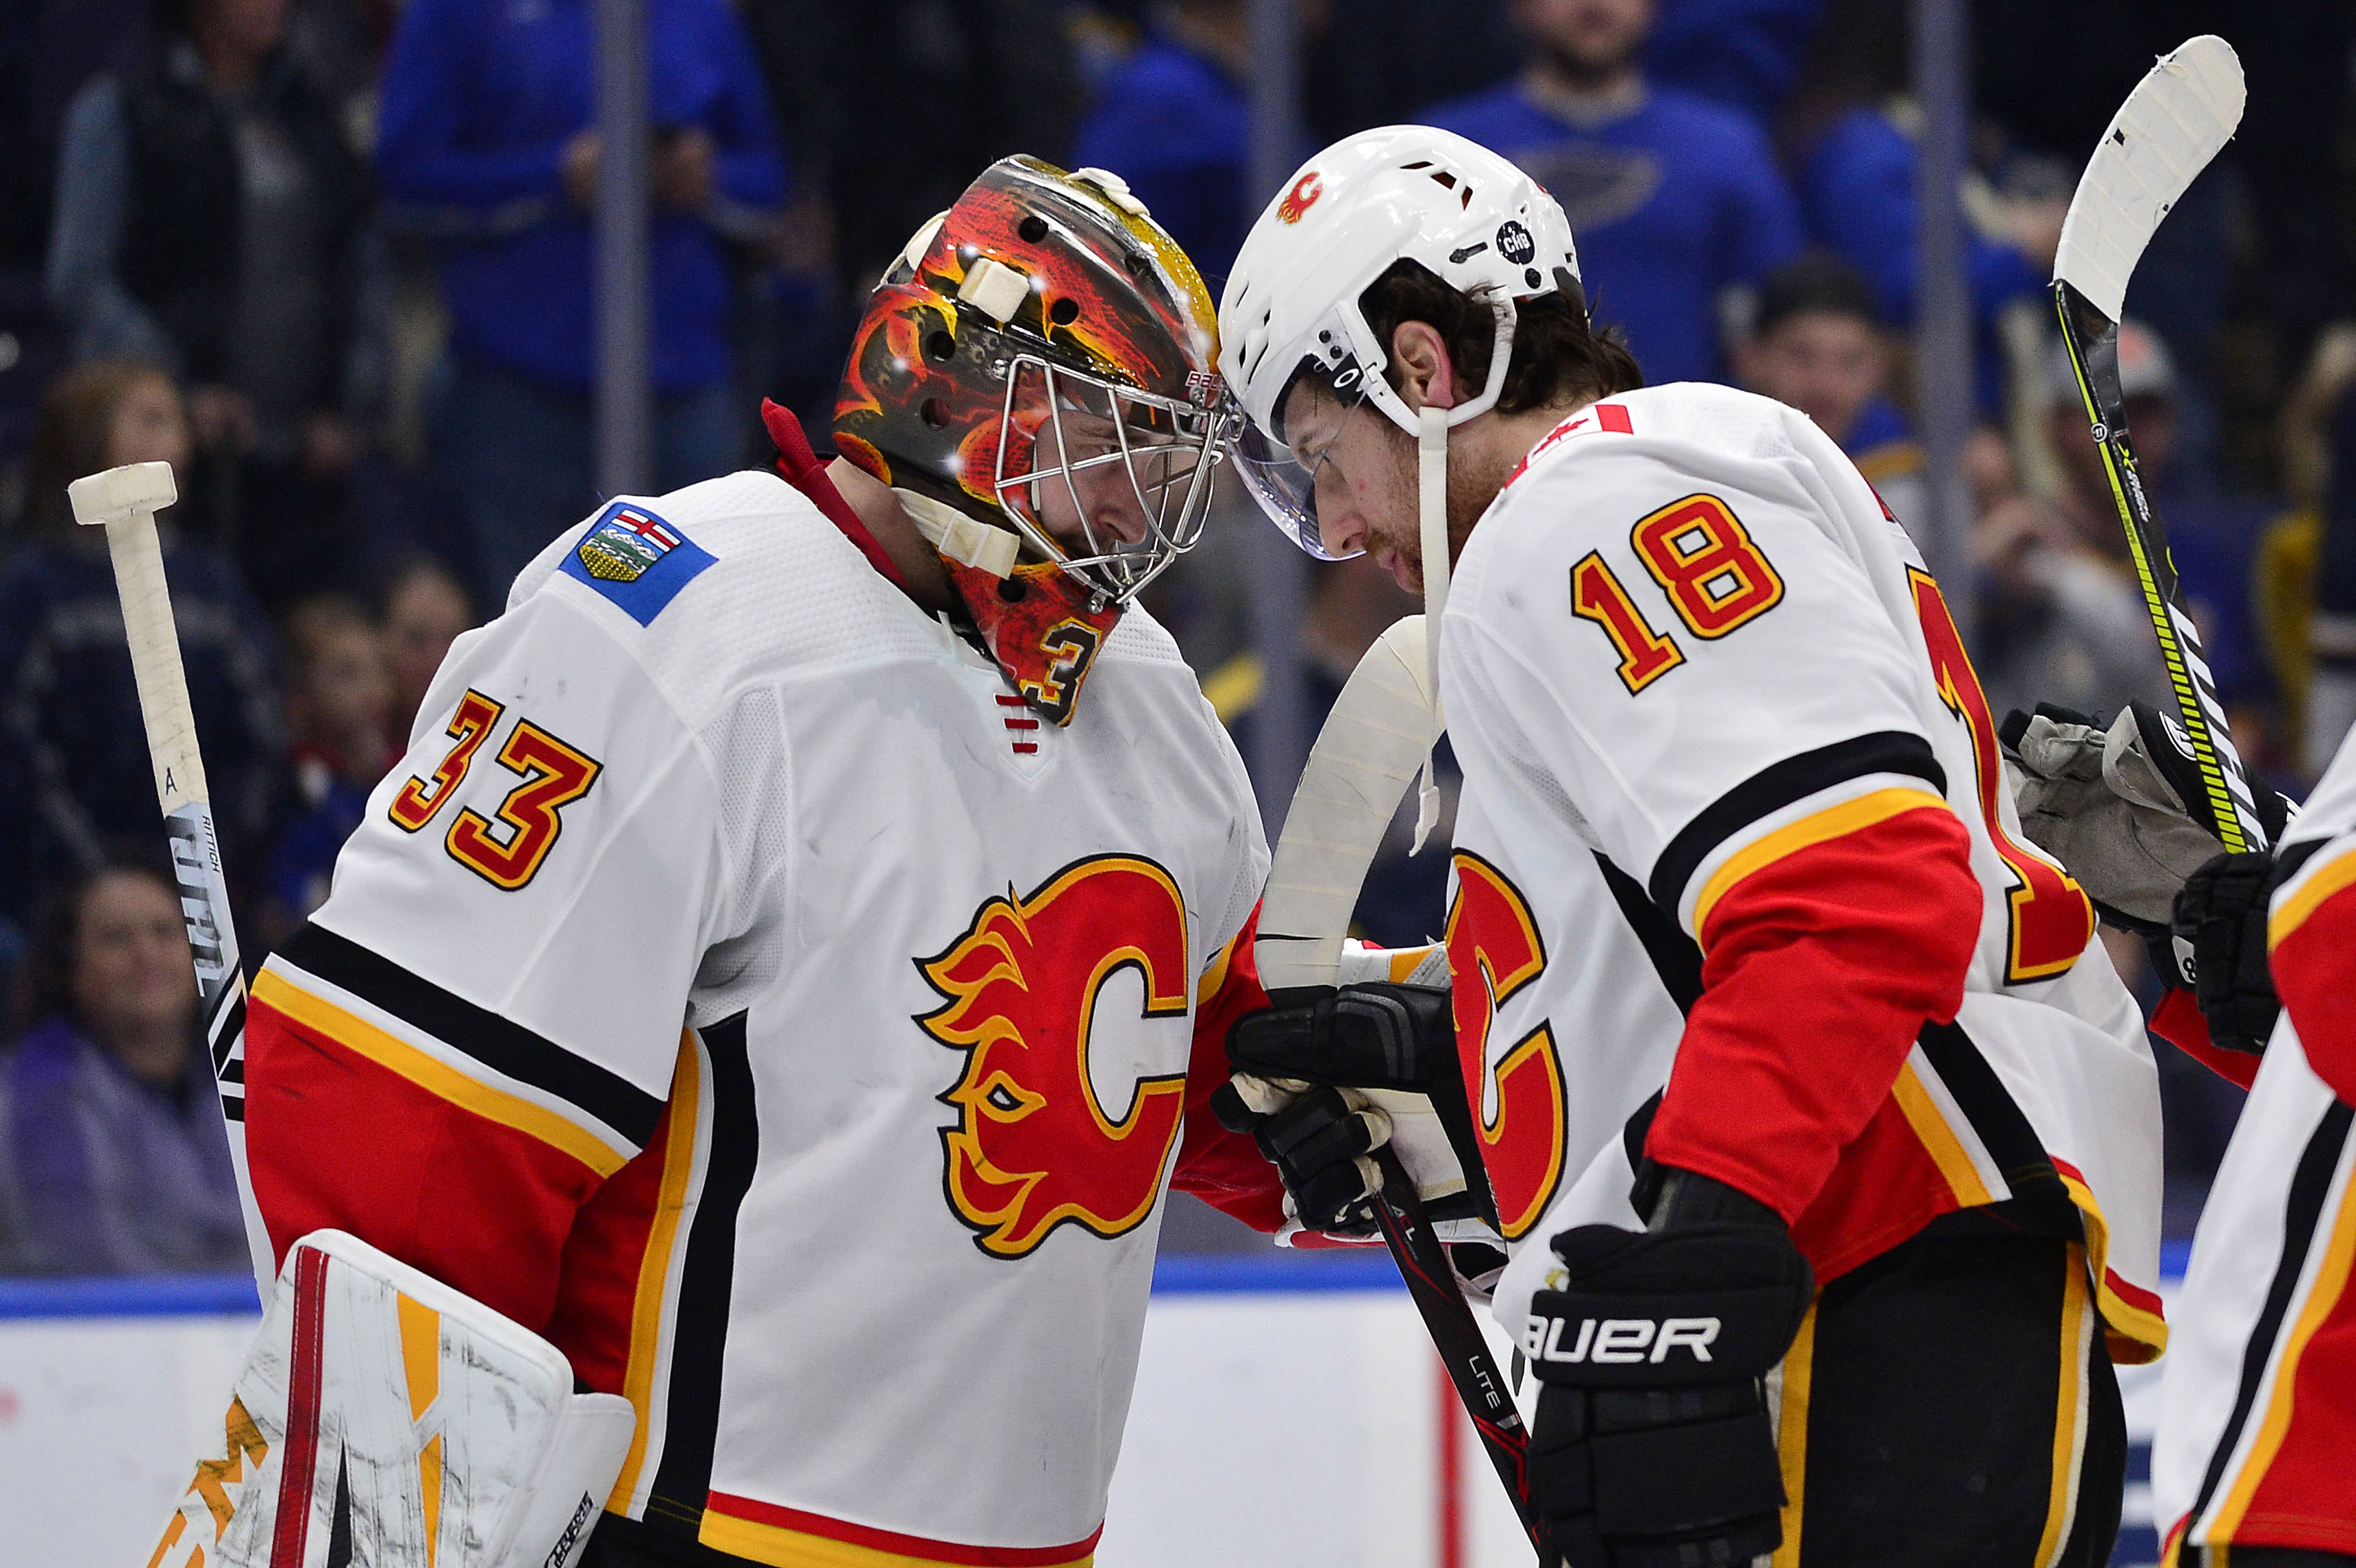 Dec 16, 2018; St. Louis, MO, USA; Calgary Flames goaltender David Rittich (33) celebrates with left wing James Neal (18) after defeating the St. Louis Blues at Enterprise Center